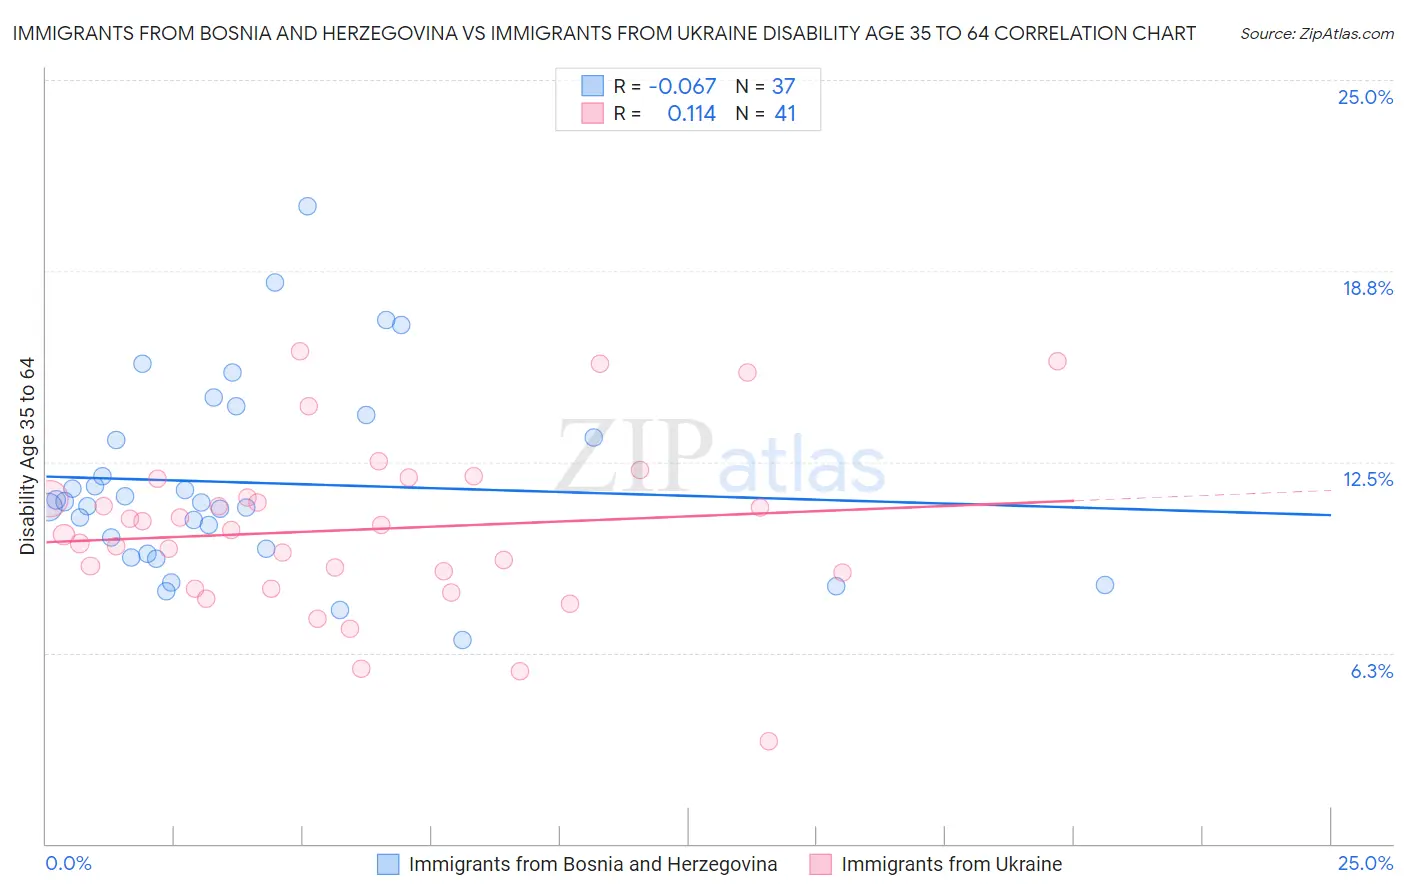 Immigrants from Bosnia and Herzegovina vs Immigrants from Ukraine Disability Age 35 to 64